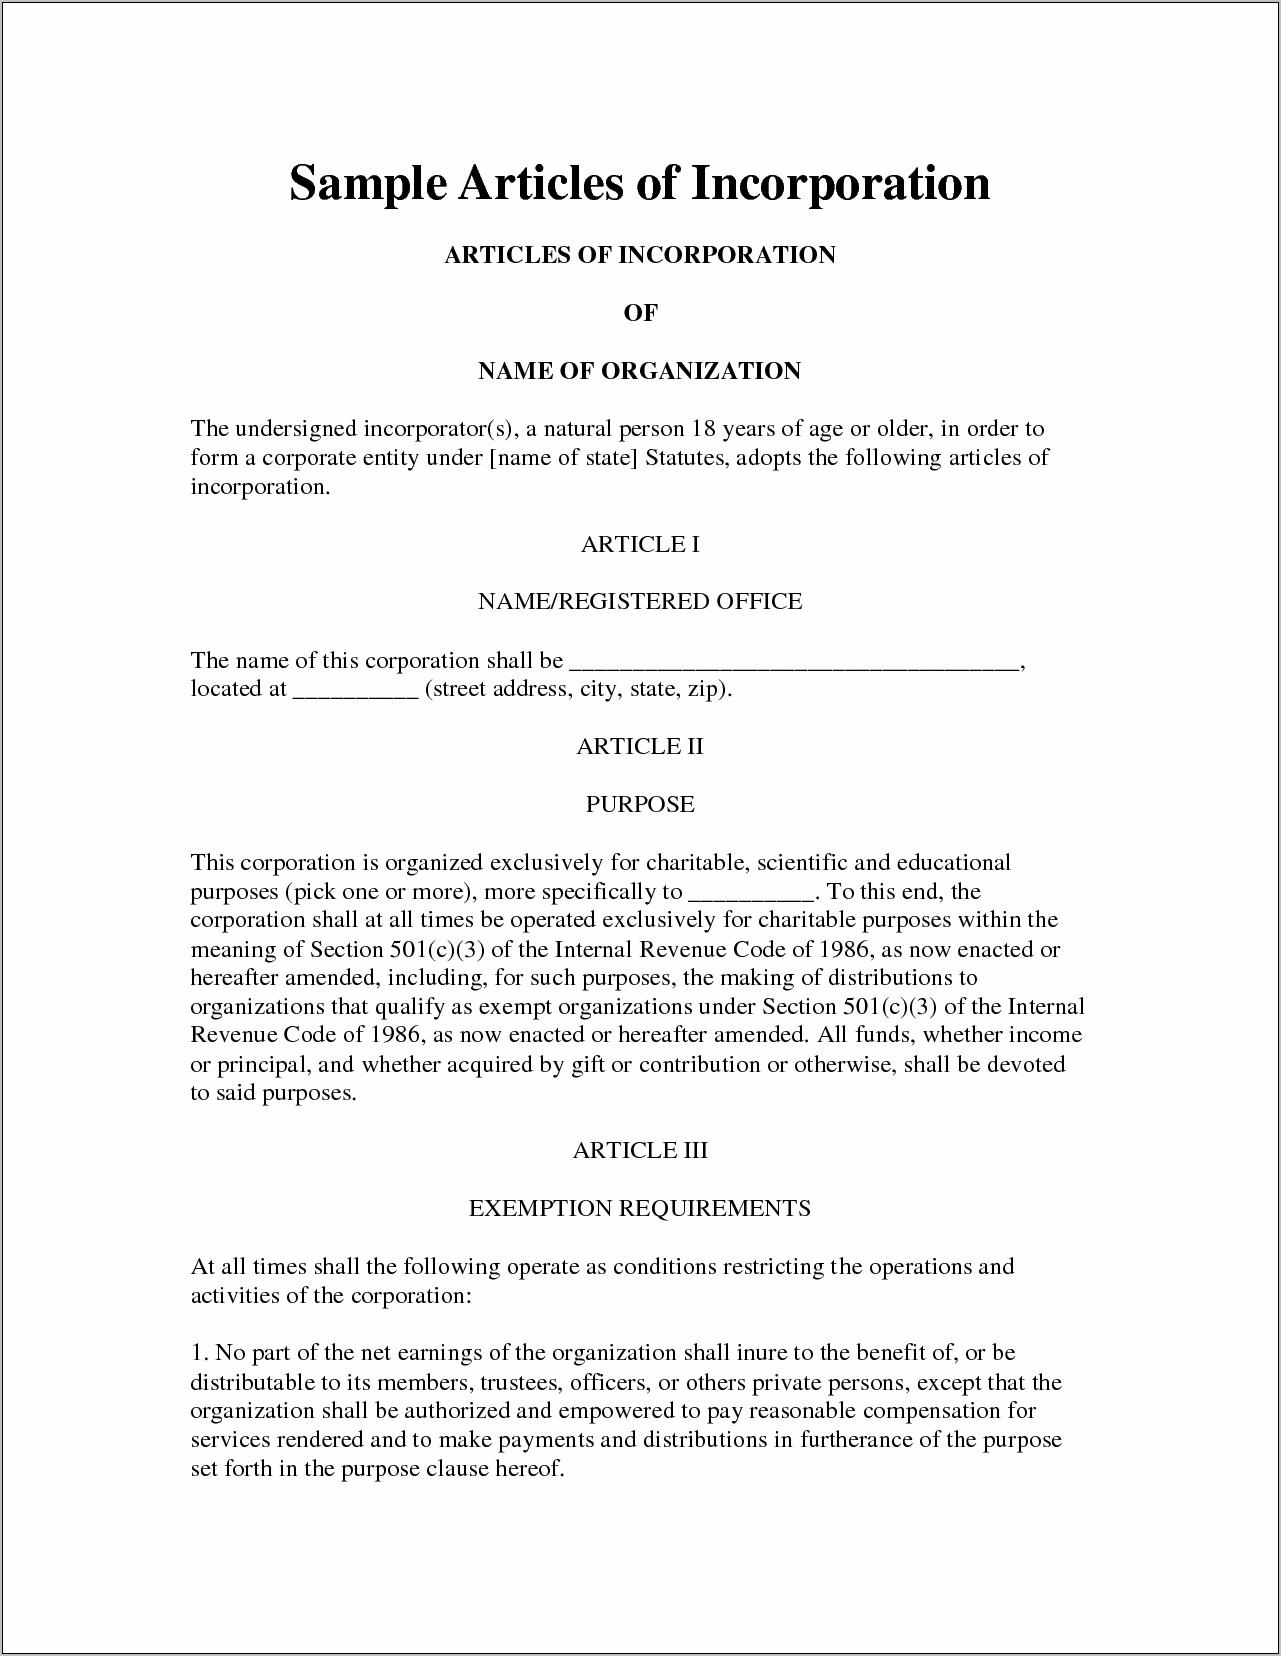 Sample For Articles Of Incorporation